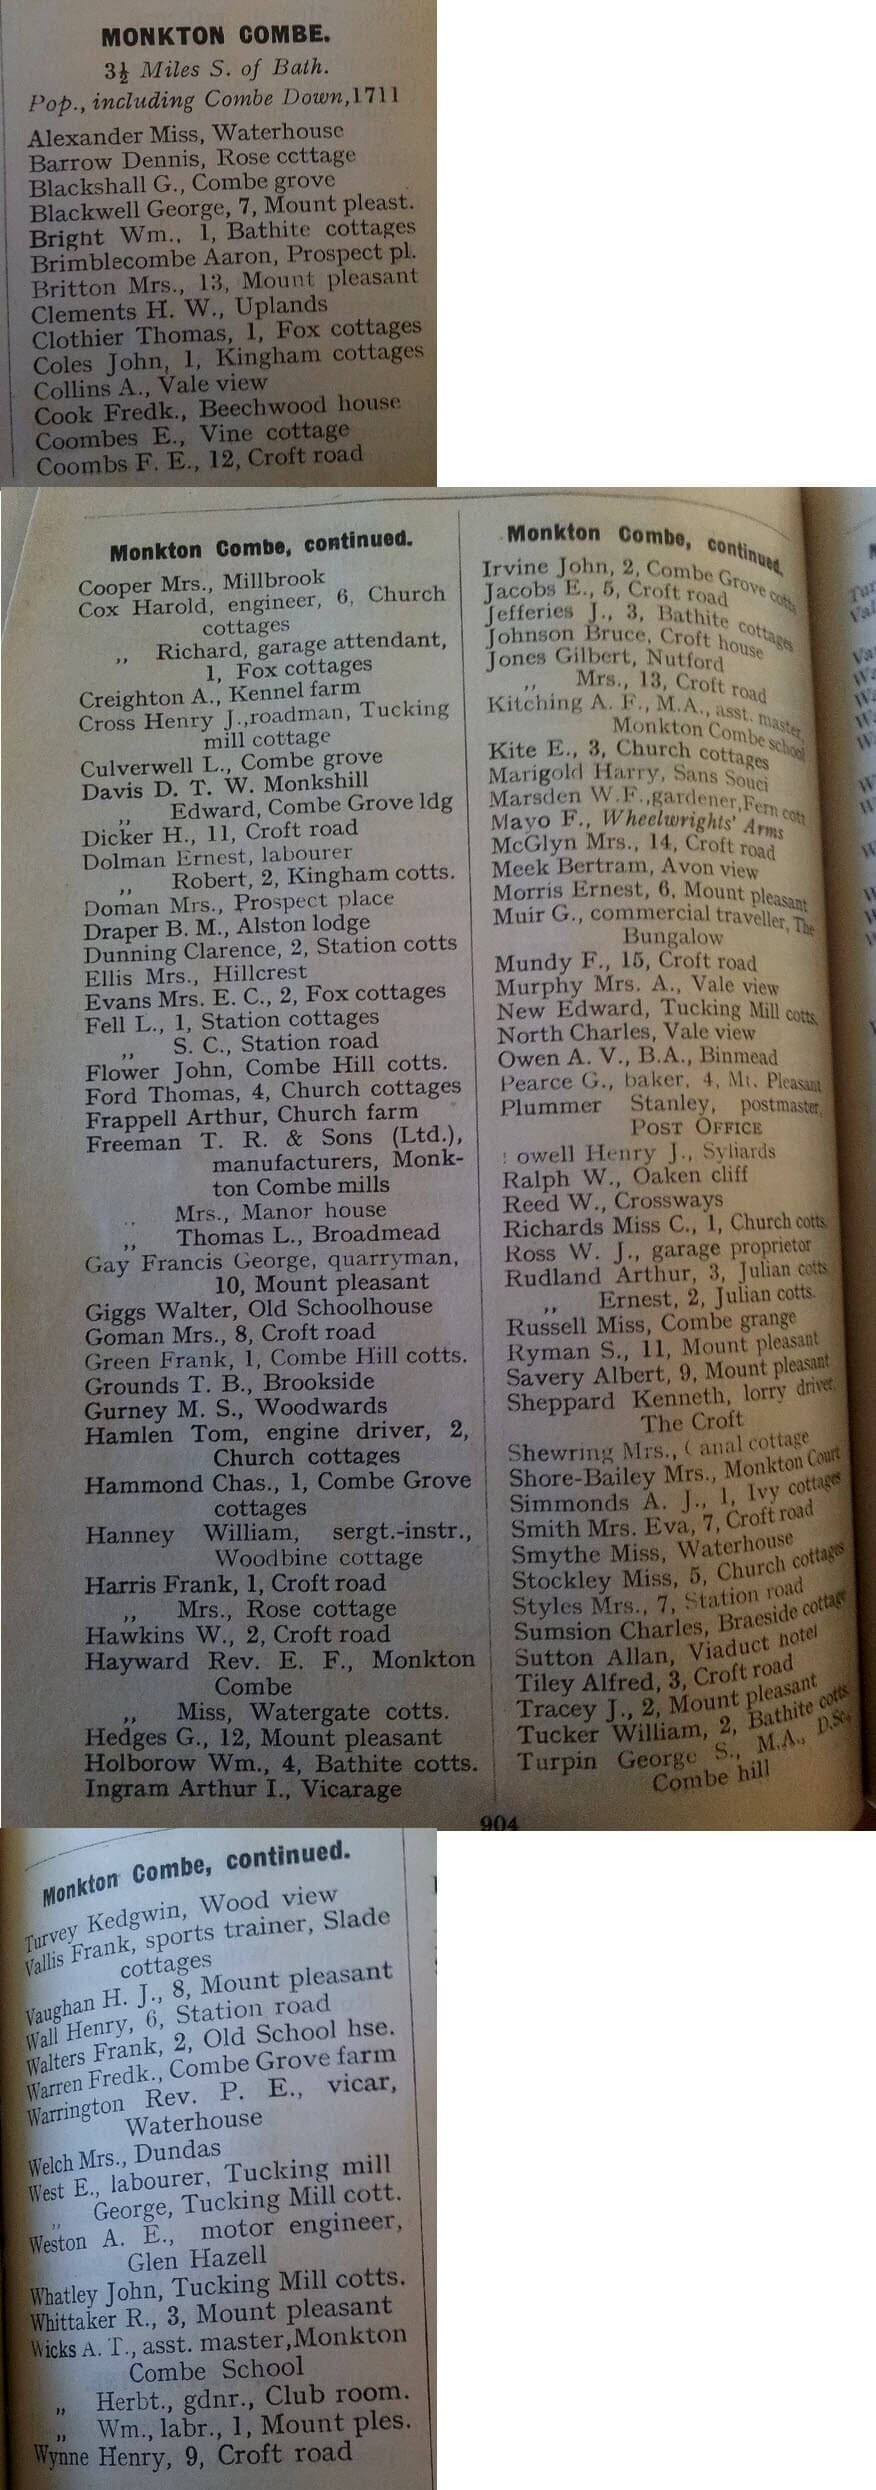 1940 Post Office Directory for Monkton Combe